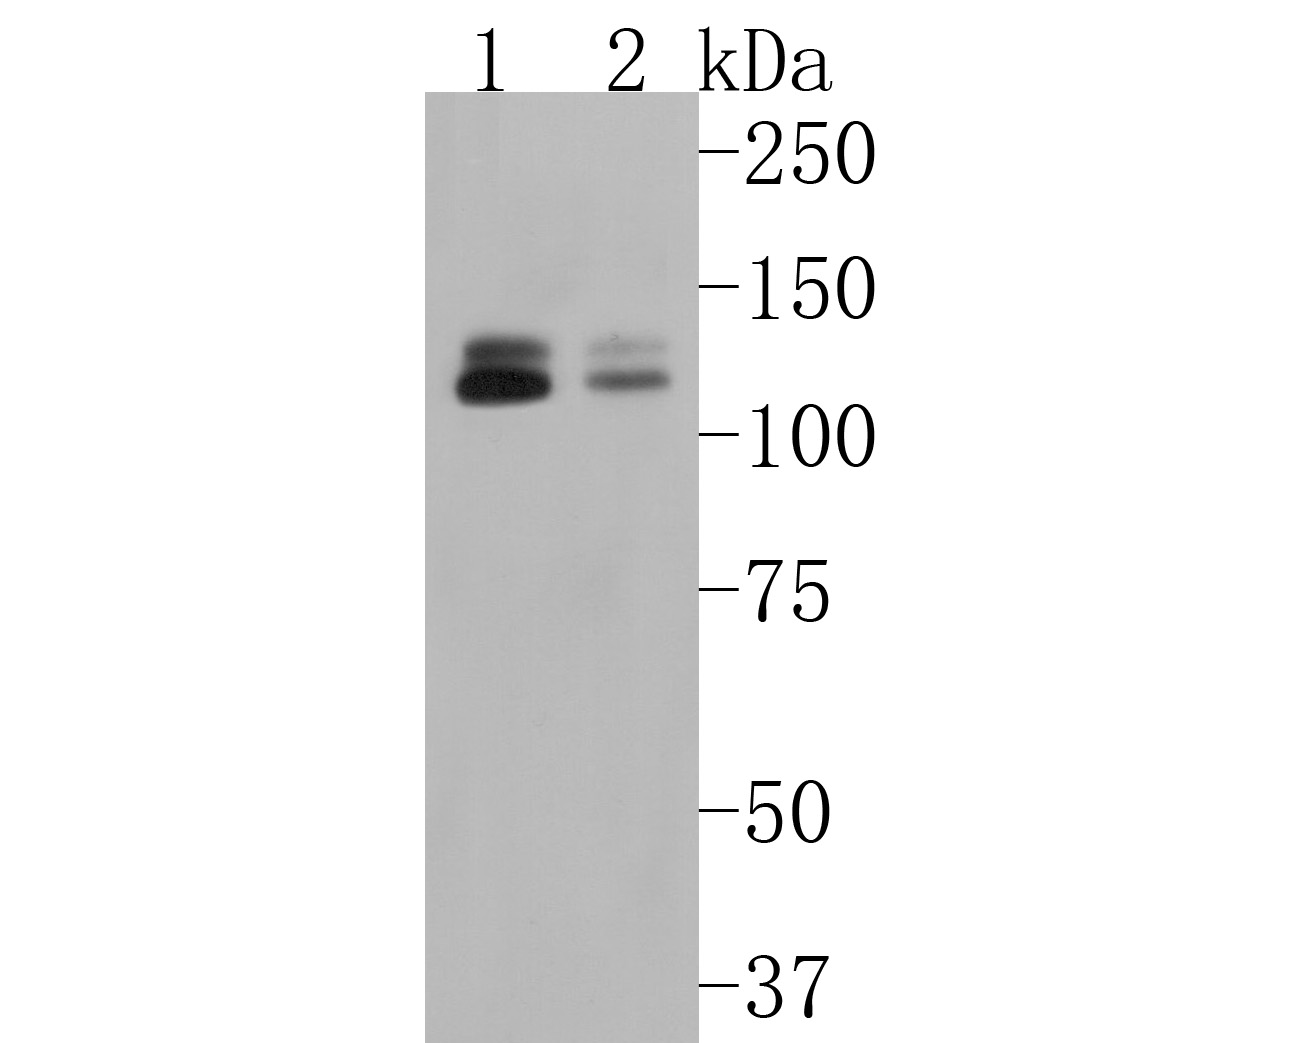 Western blot analysis of MKLP1 on different lysates. Proteins were transferred to a PVDF membrane and blocked with 5% BSA in PBS for 1 hour at room temperature. The primary antibody (ET1607-63, 1/500) was used in 5% BSA at room temperature for 2 hours. Goat Anti-Rabbit IgG - HRP Secondary Antibody (HA1001) at 1:5,000 dilution was used for 1 hour at room temperature.<br />
Positive control: <br />
Lane 1: 293 cell lysate<br />
Lane 2: A549 cell lysate